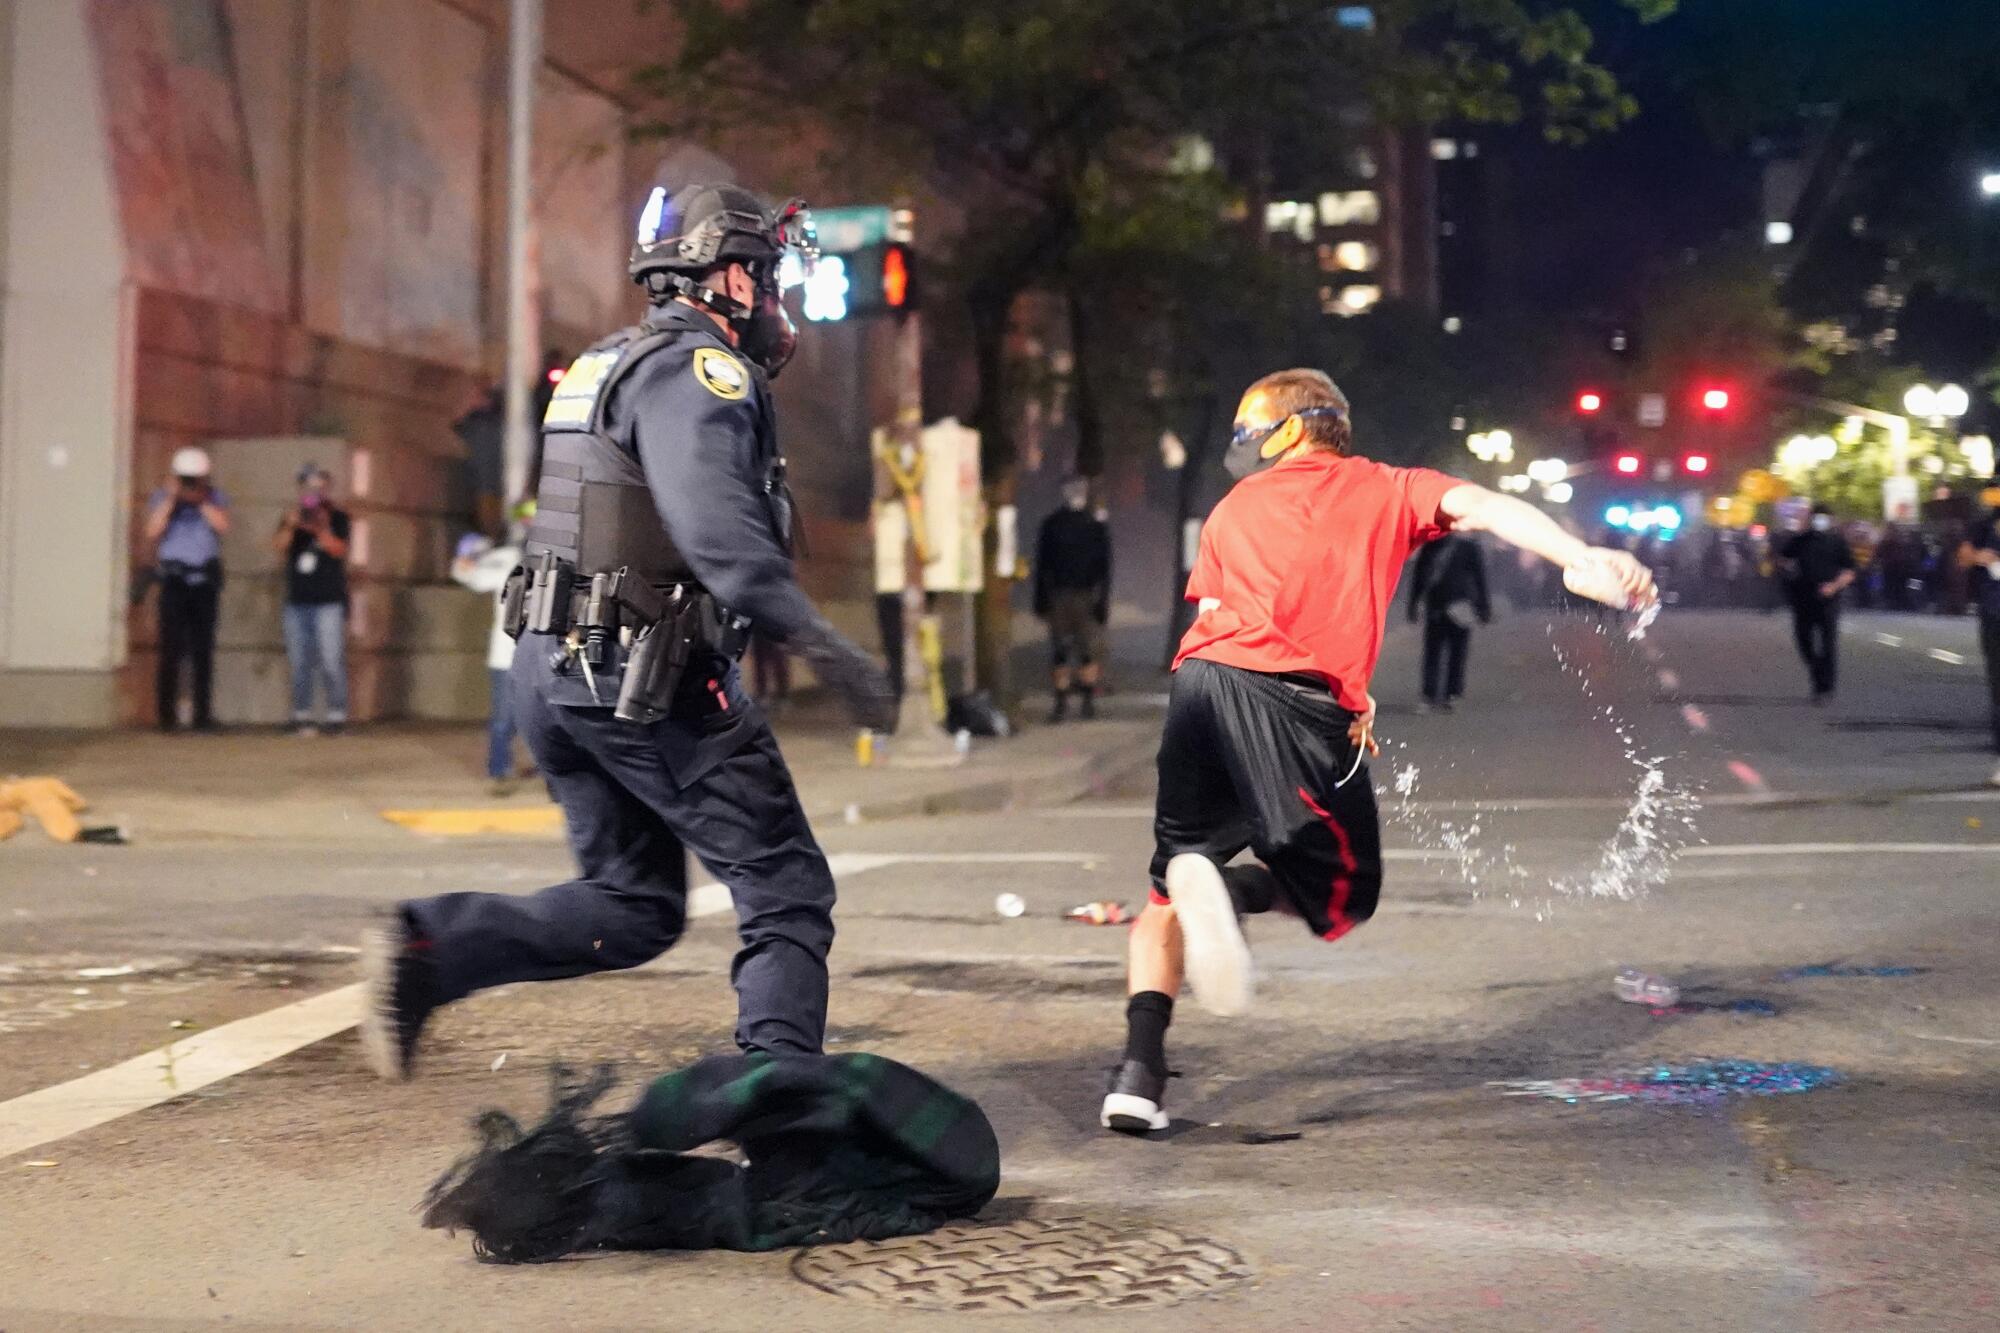  A protester escapes a federal officer during an arrest attempt in Portland, Ore.